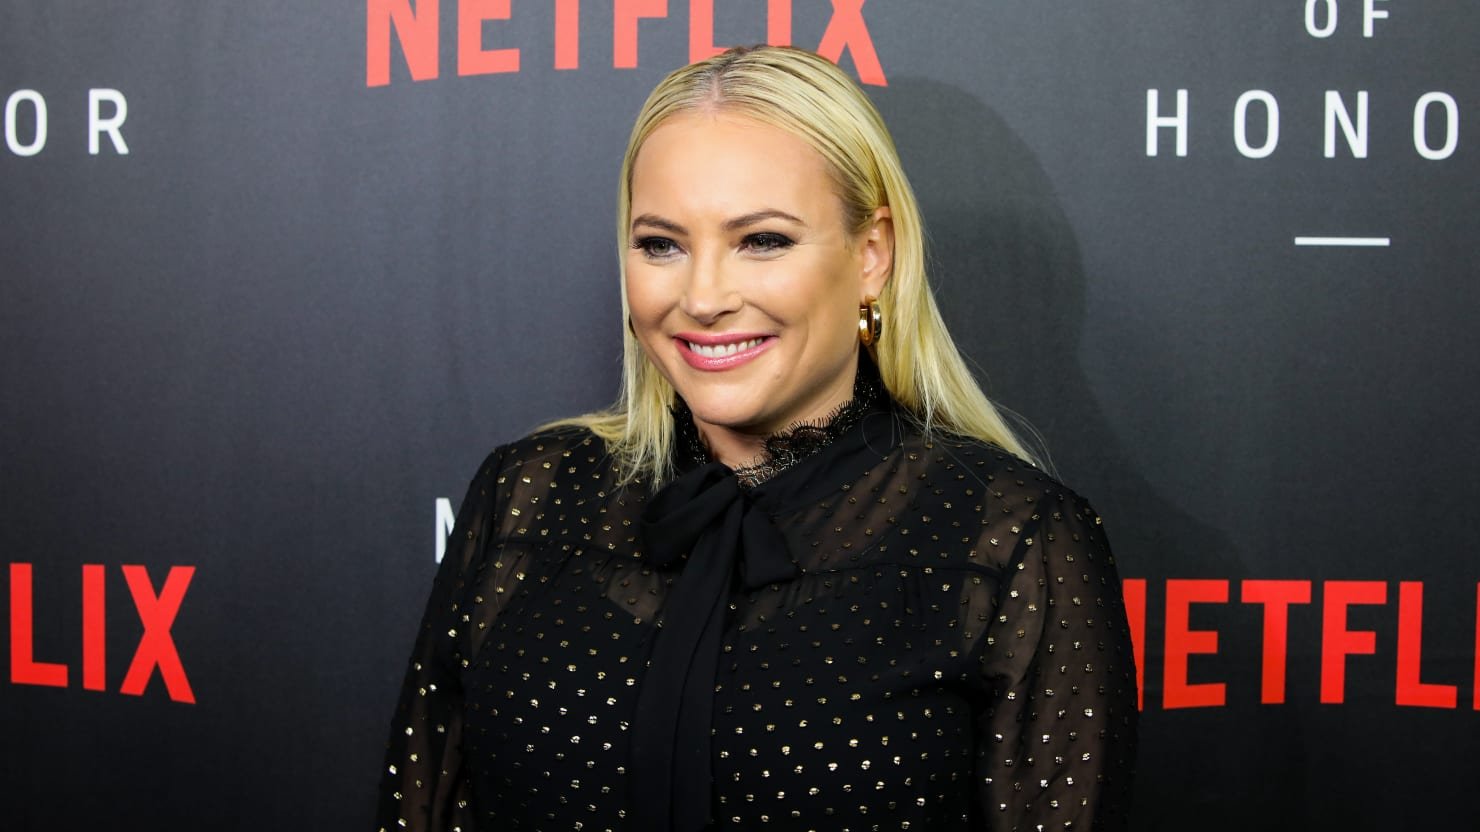 Meghan McCain Likens ‘The View’ to ‘Ellen’ in Scorched-Earth Interview